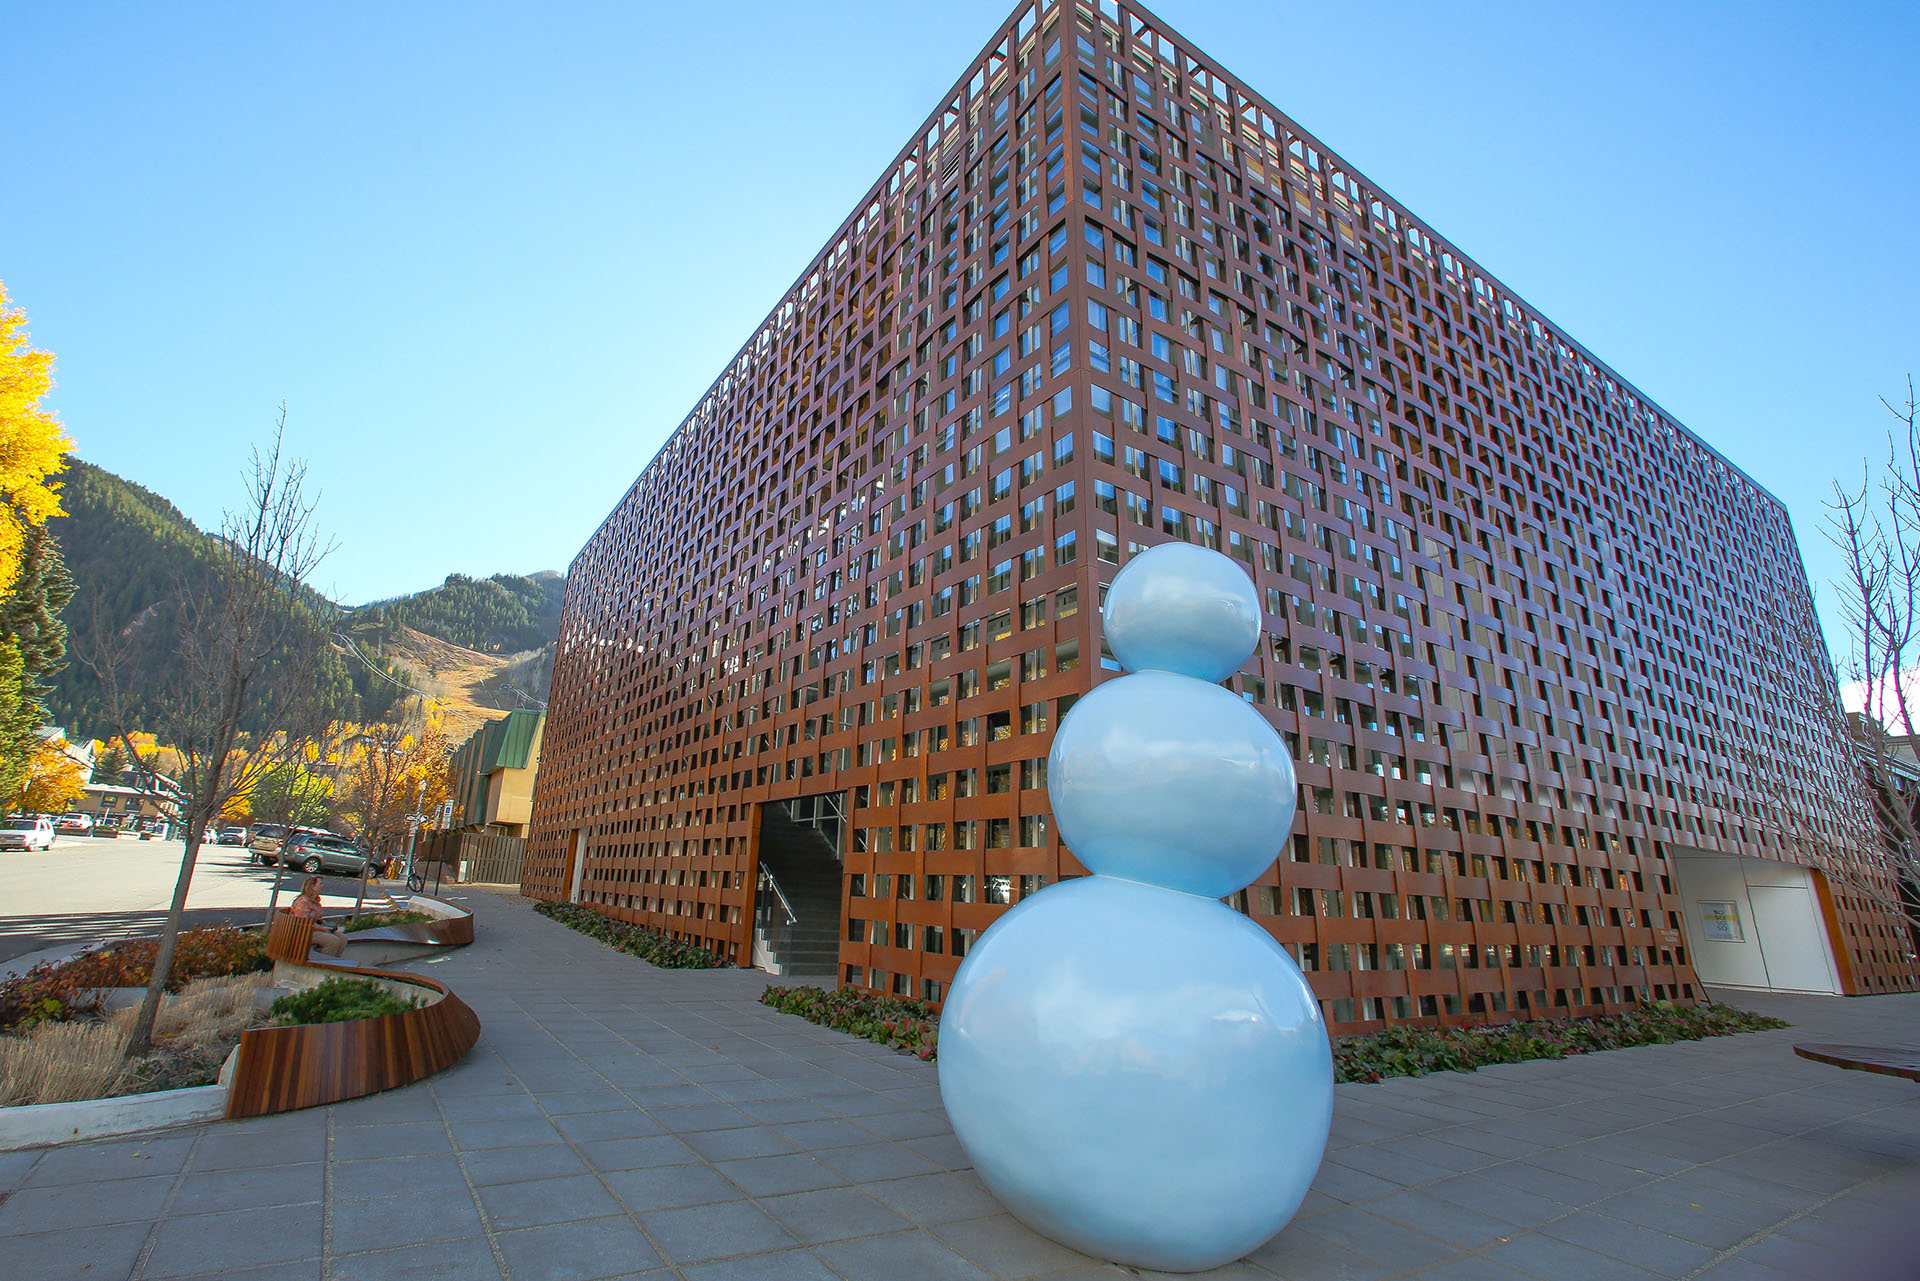 <p>The Aspen Art Museum, in the state of Colorado (United States), created in 1979, is the work of Japanese architect Shigeru Ban, winner of the Pritzker Prize for architecture in 2014, and stands out in its construction for its woven wood screen and by the roof frame, also made of wood.</p>